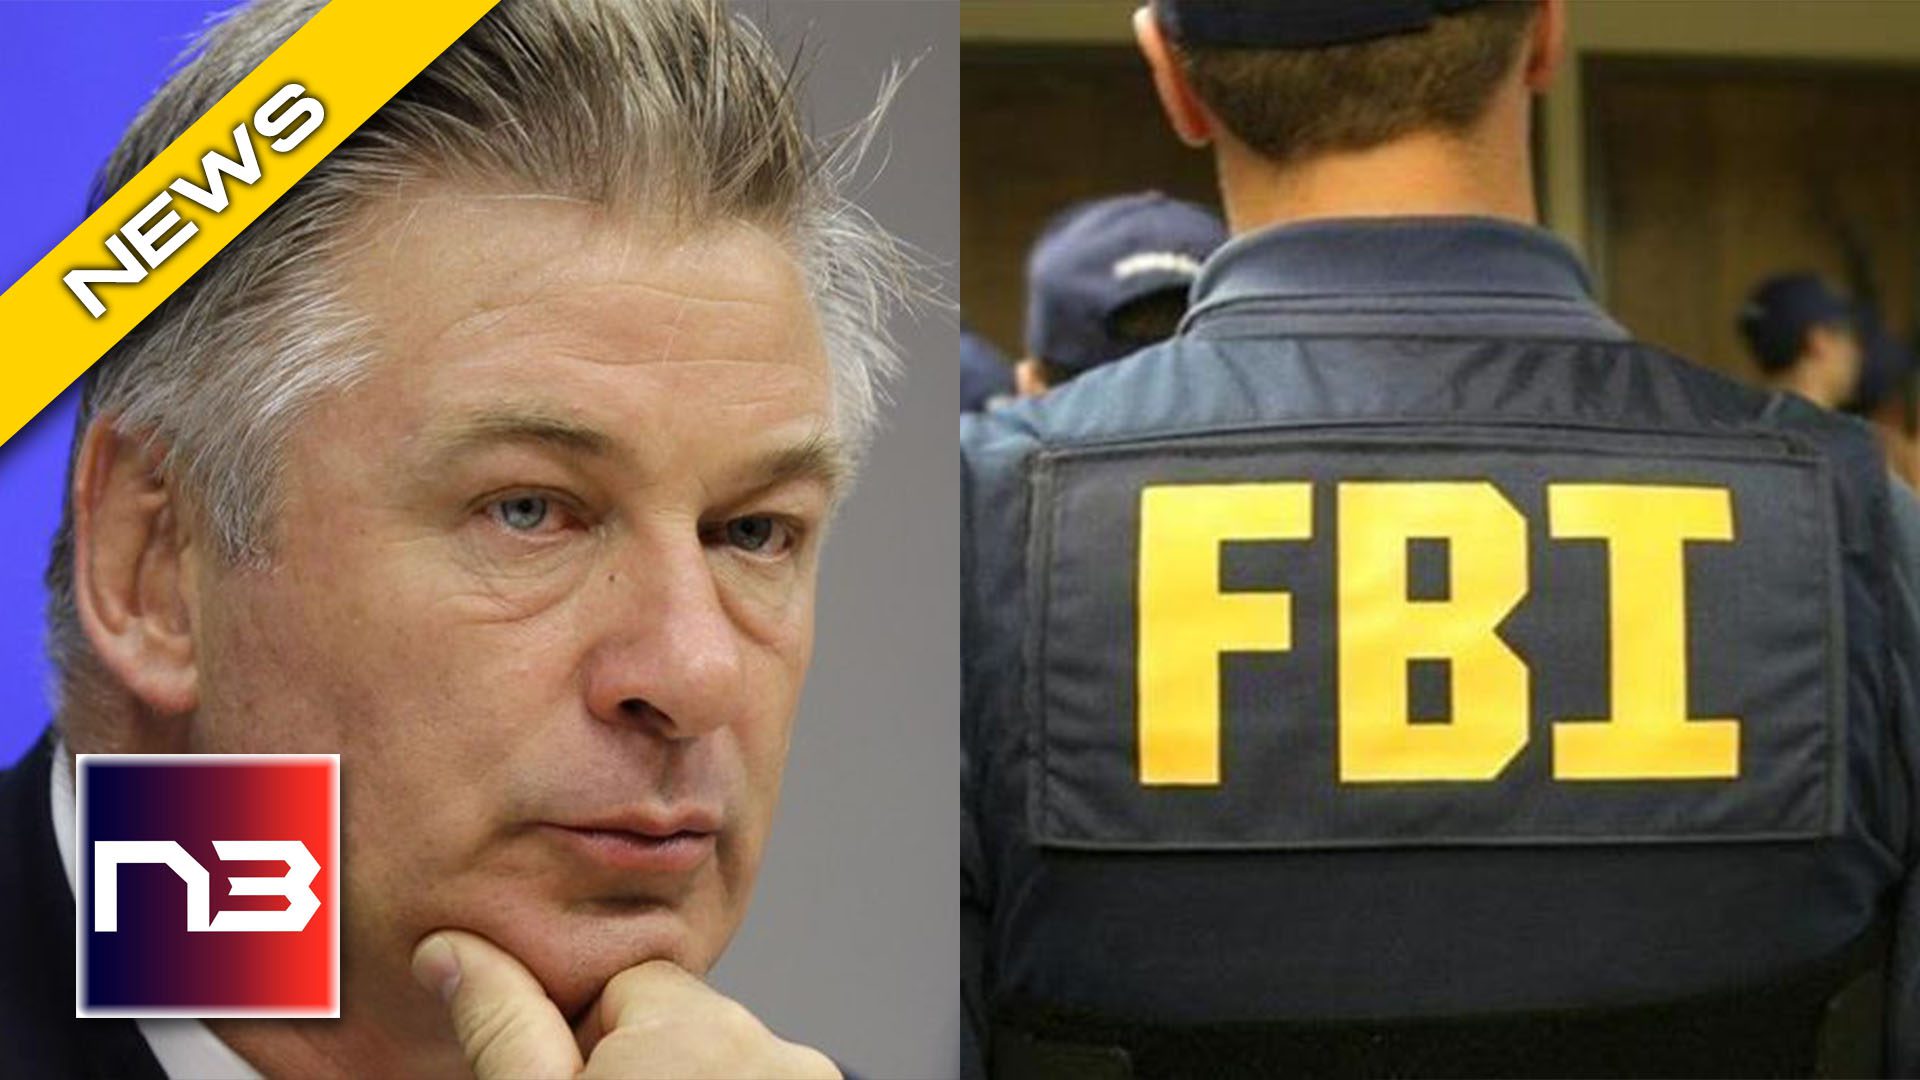 Alec Baldwin Gets BAD NEWS After FBI Forensic Revolver Testing: Is He Going To Prison?